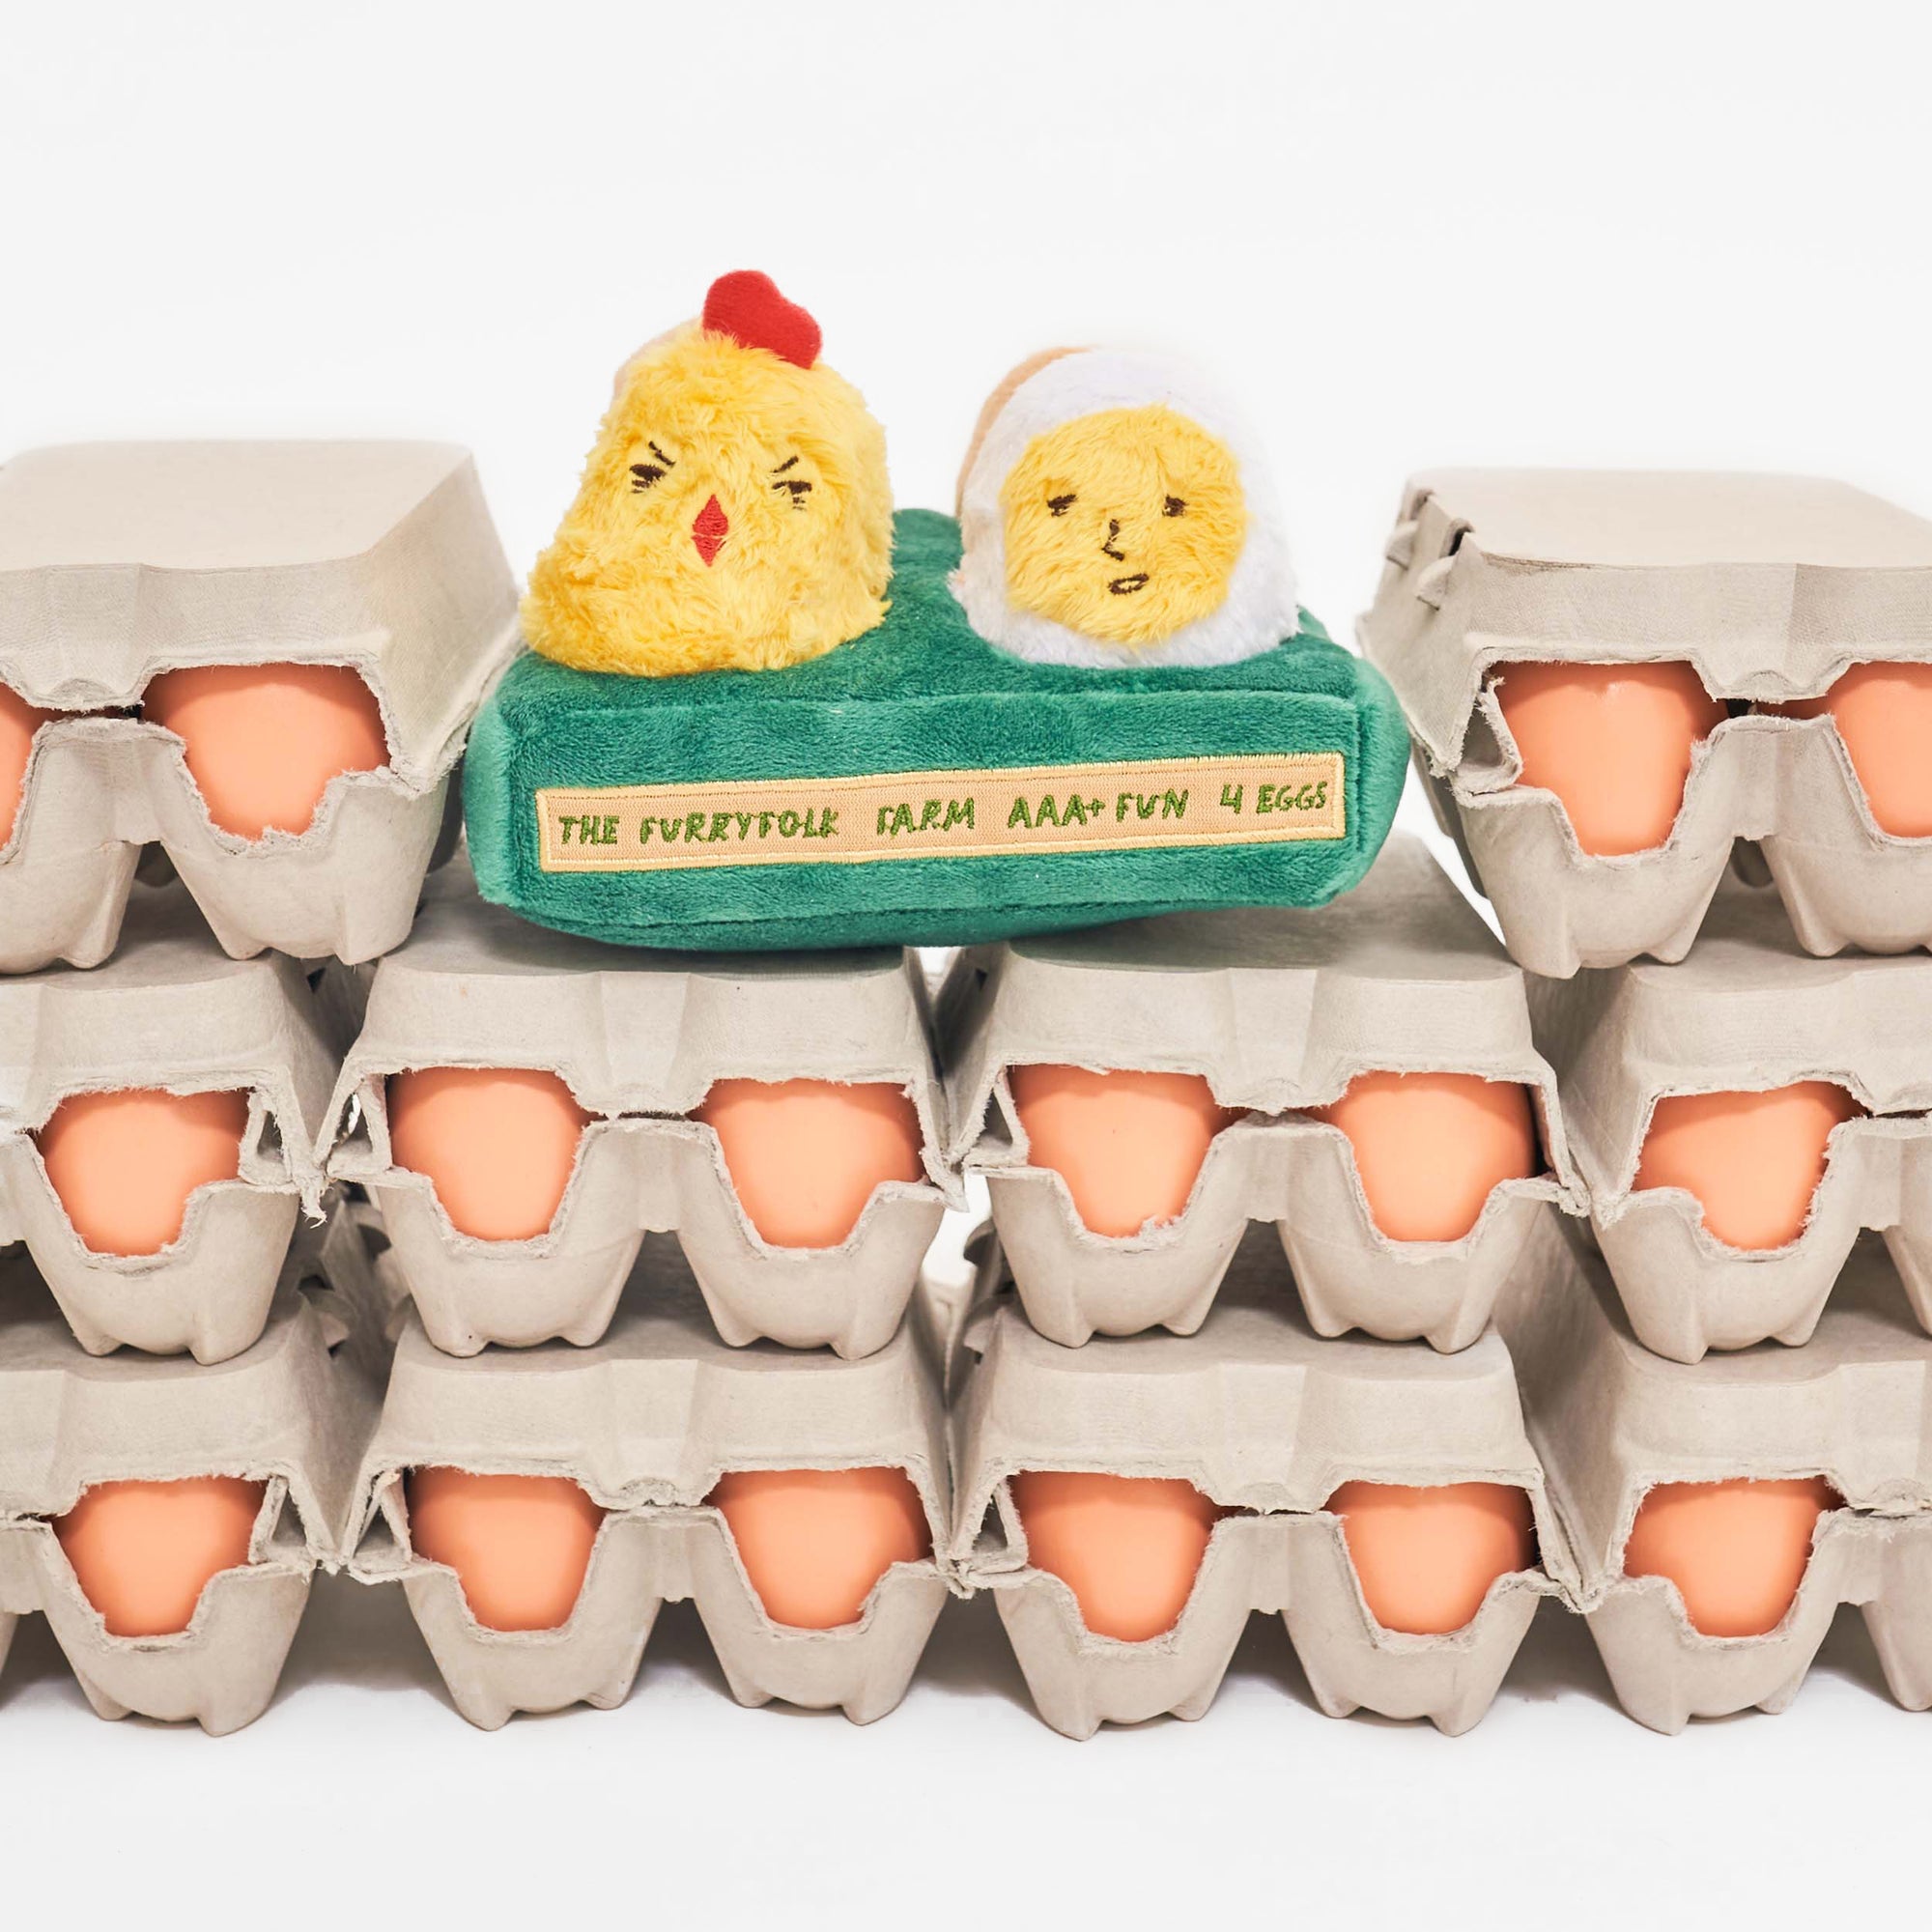 Plush Chickens and Egg Carton Dog Toy for Hide-and-Seek Fun.